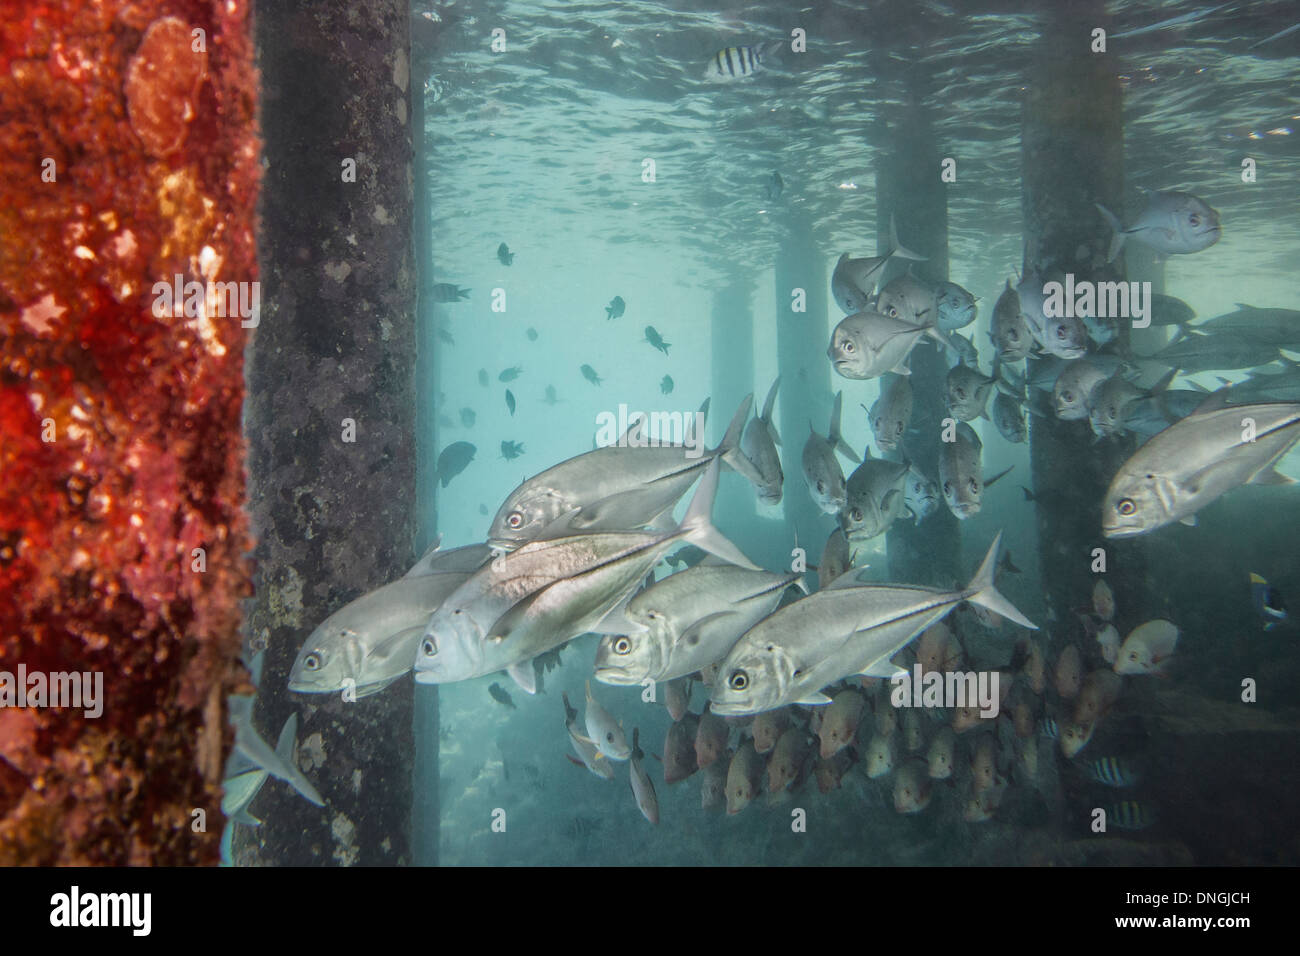 Shoals of fish in the ocean, under a pier in The Maldives Stock Photo